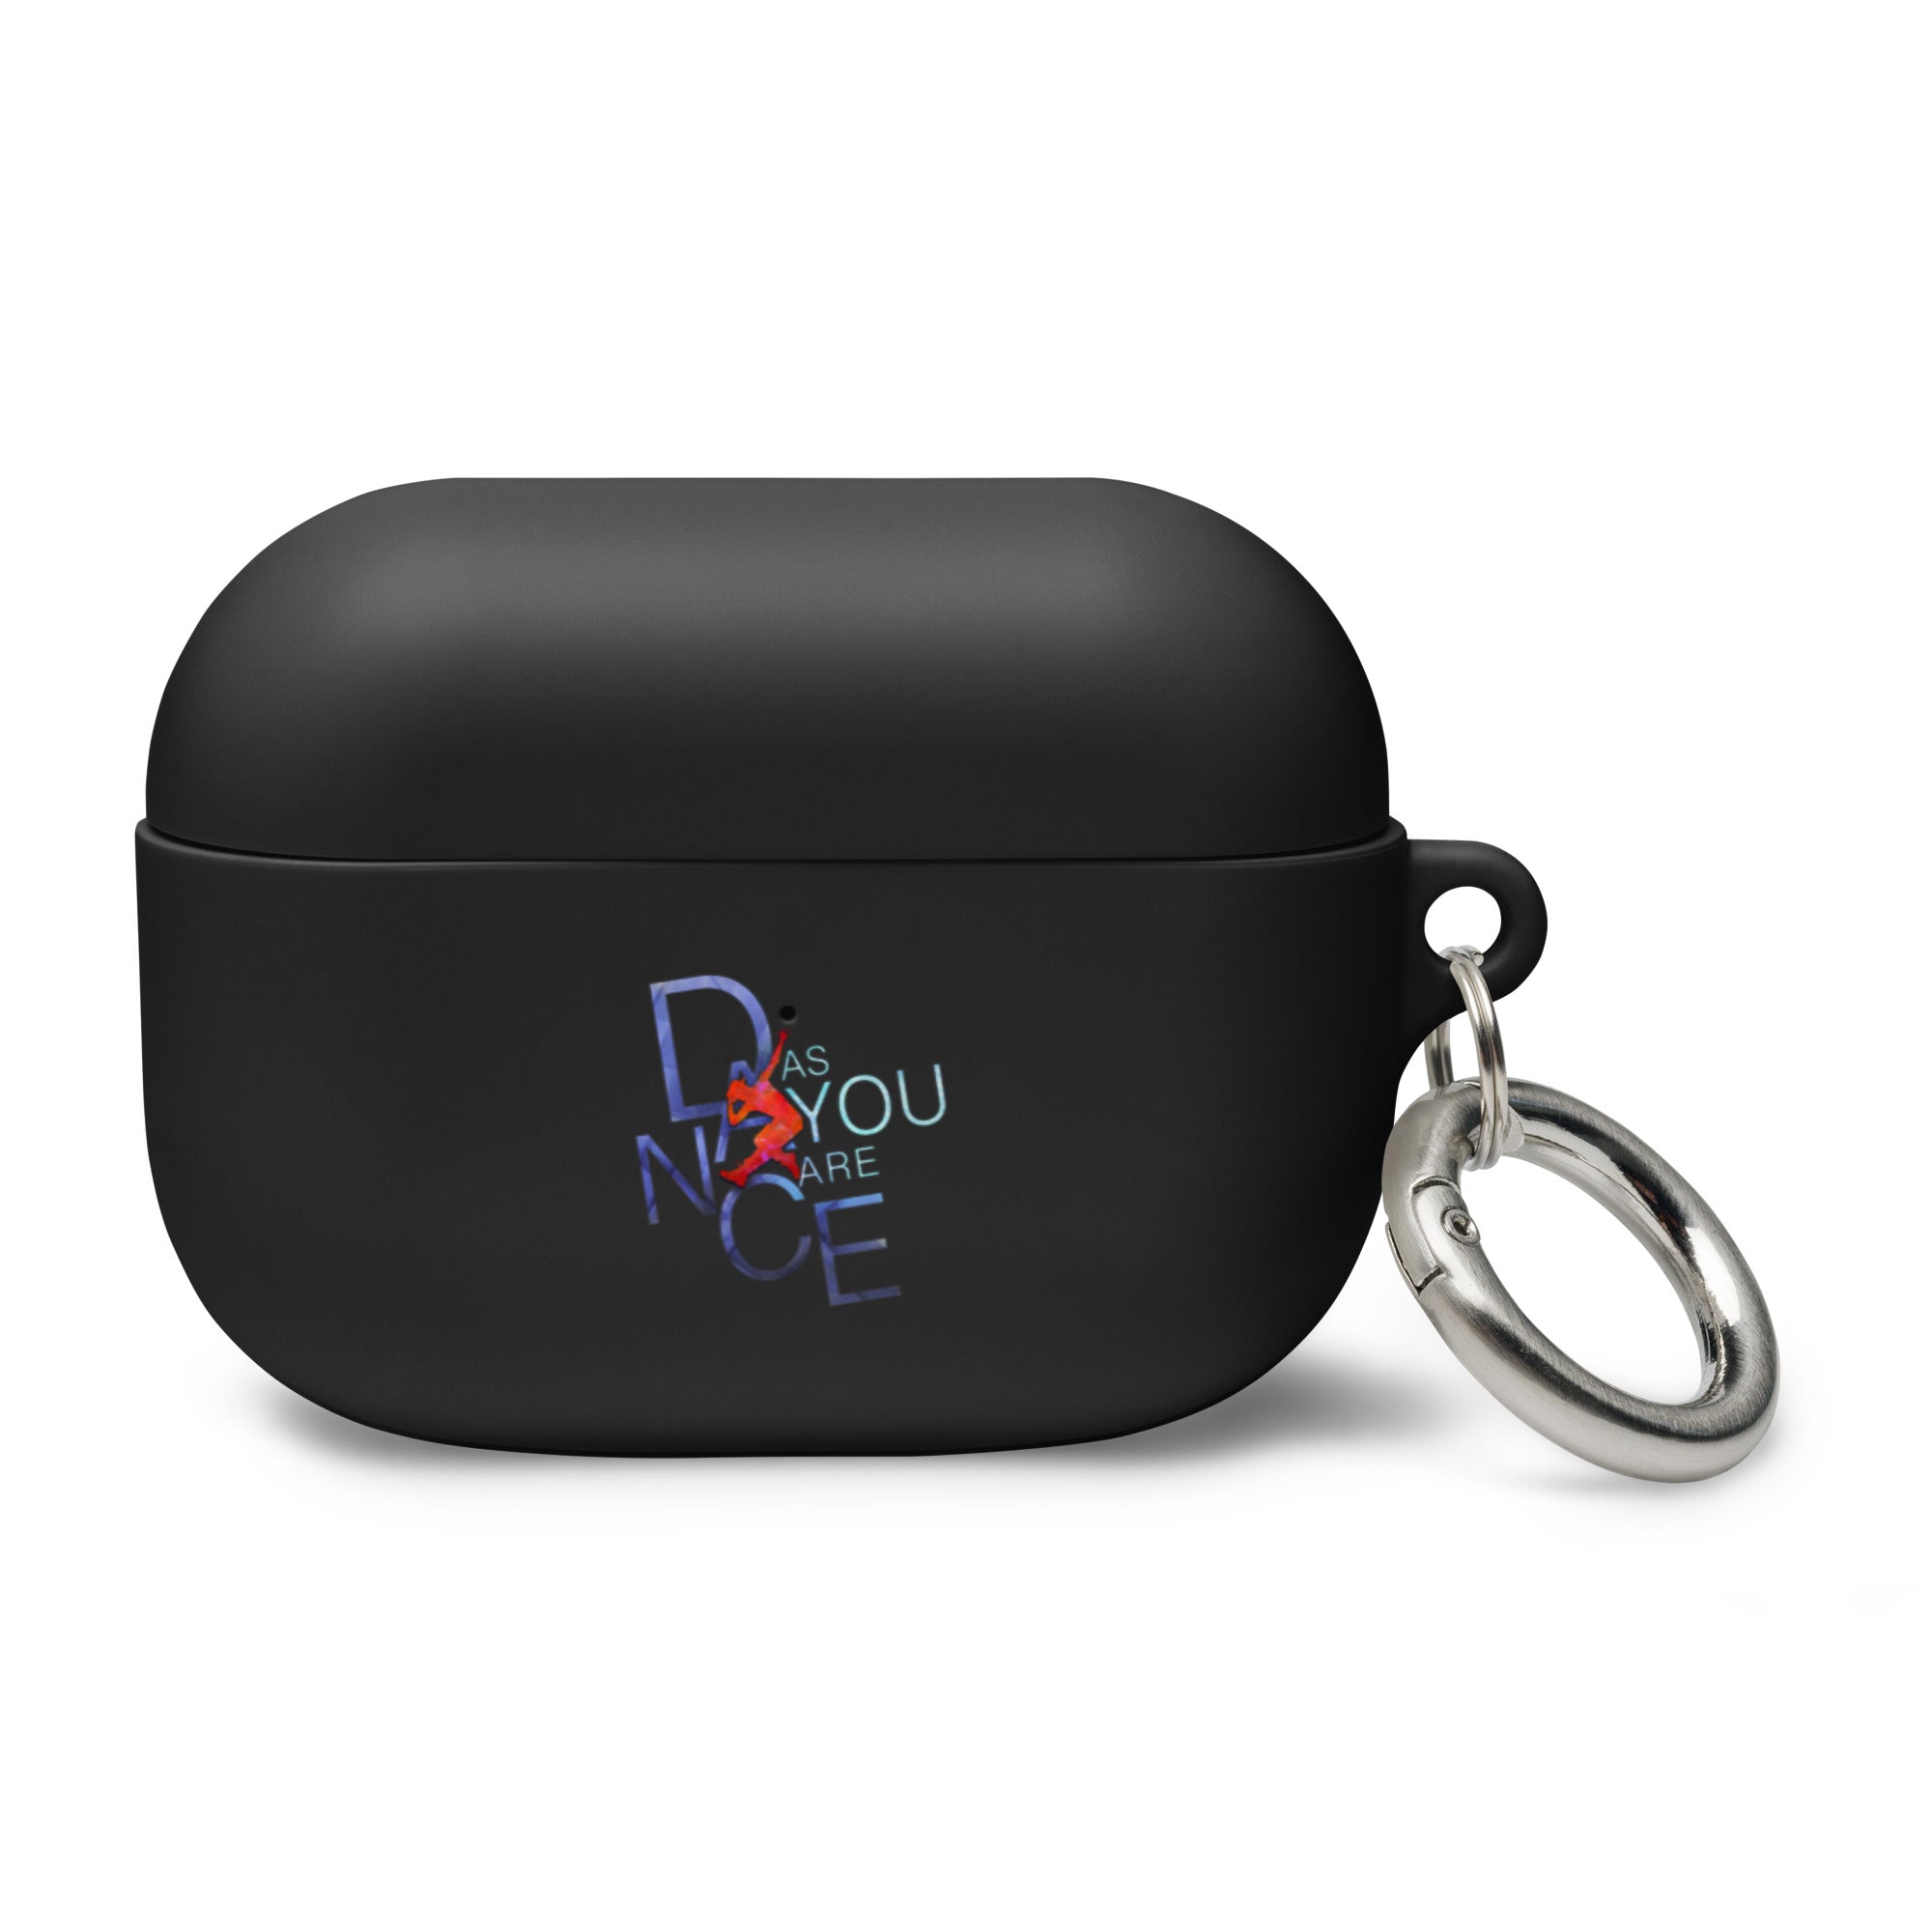 Dance As You Are - AirPods case